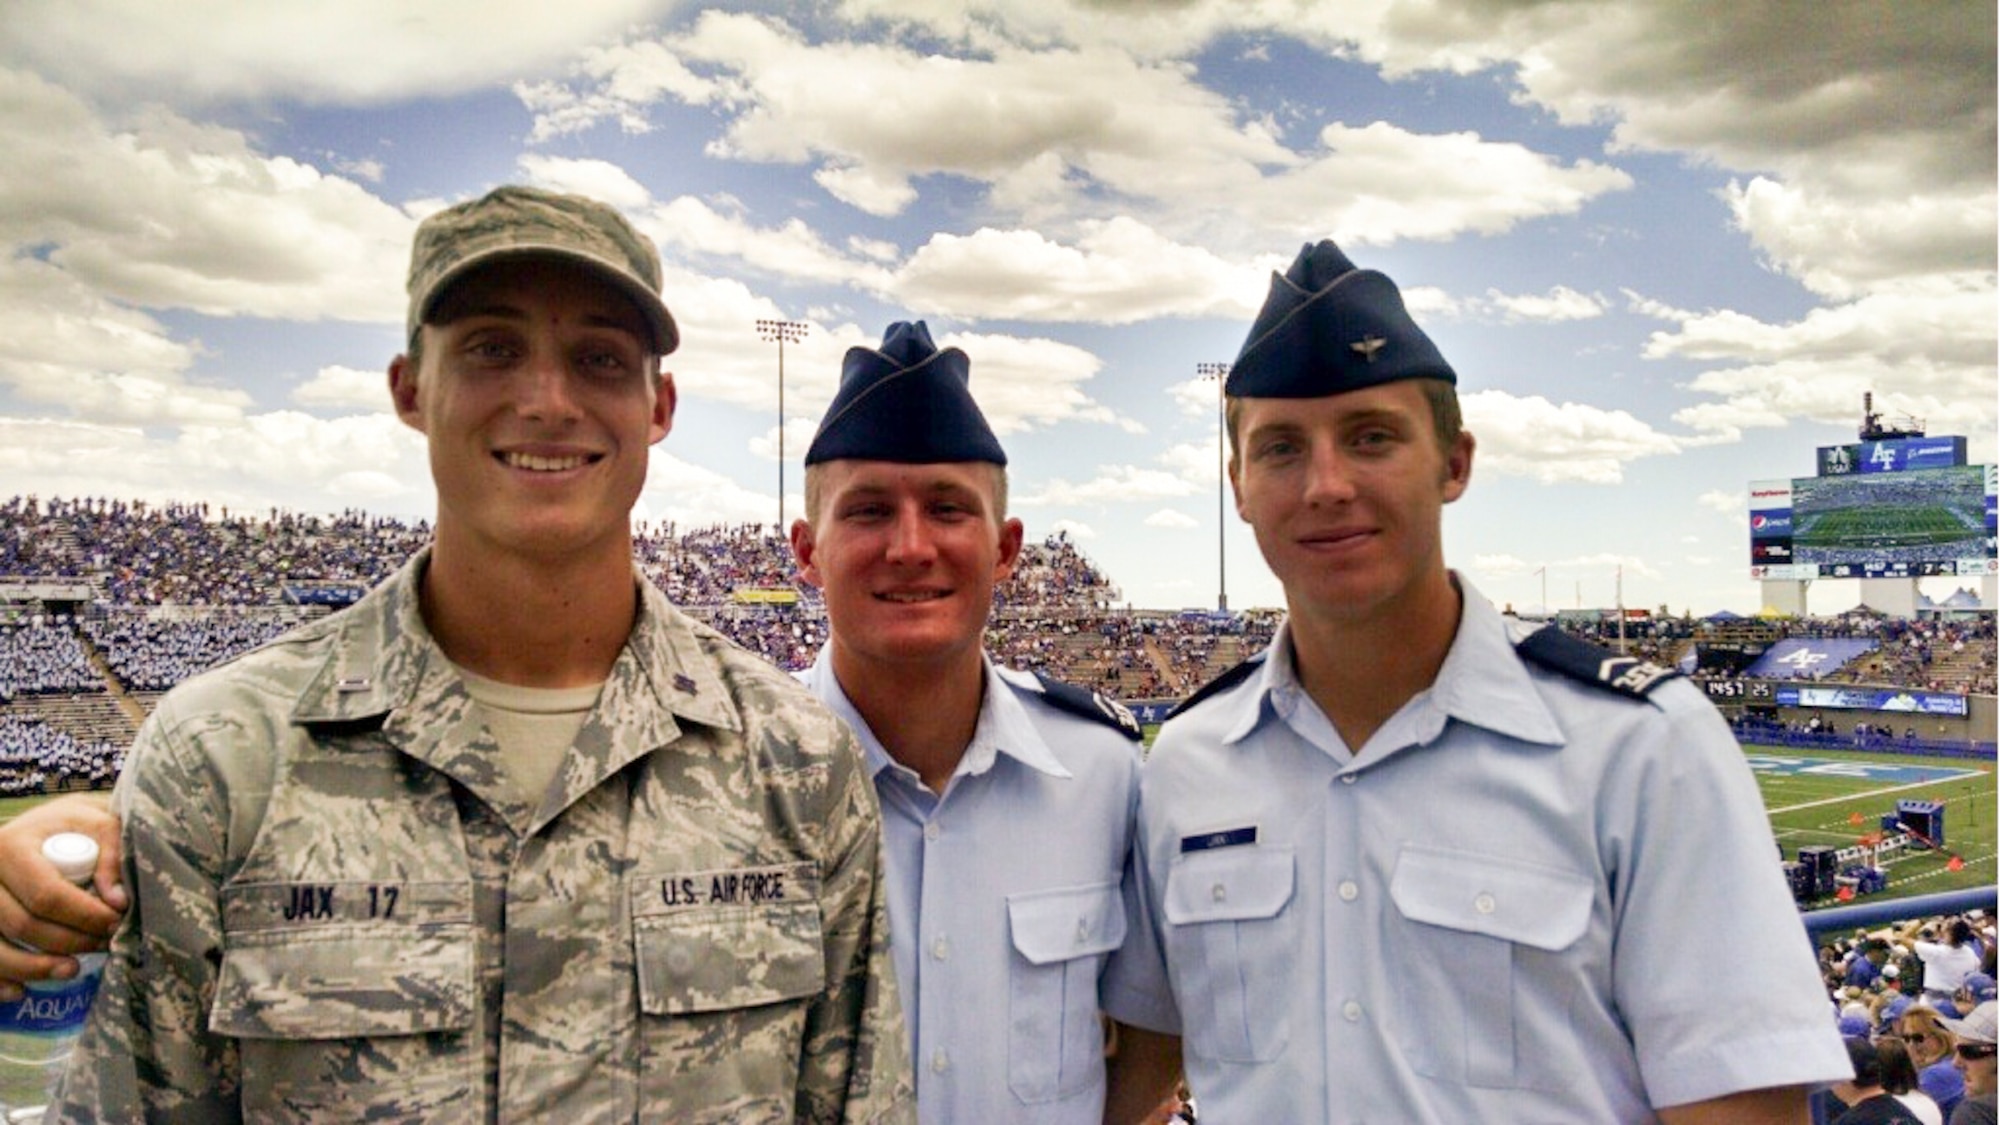 (from left to right) Cadet Griffin Jax, stands with his brothers, Cadets Carson and Parker Jax, during his senior year at the Air Force Academy in 2017. Now a captain in the Air Force,